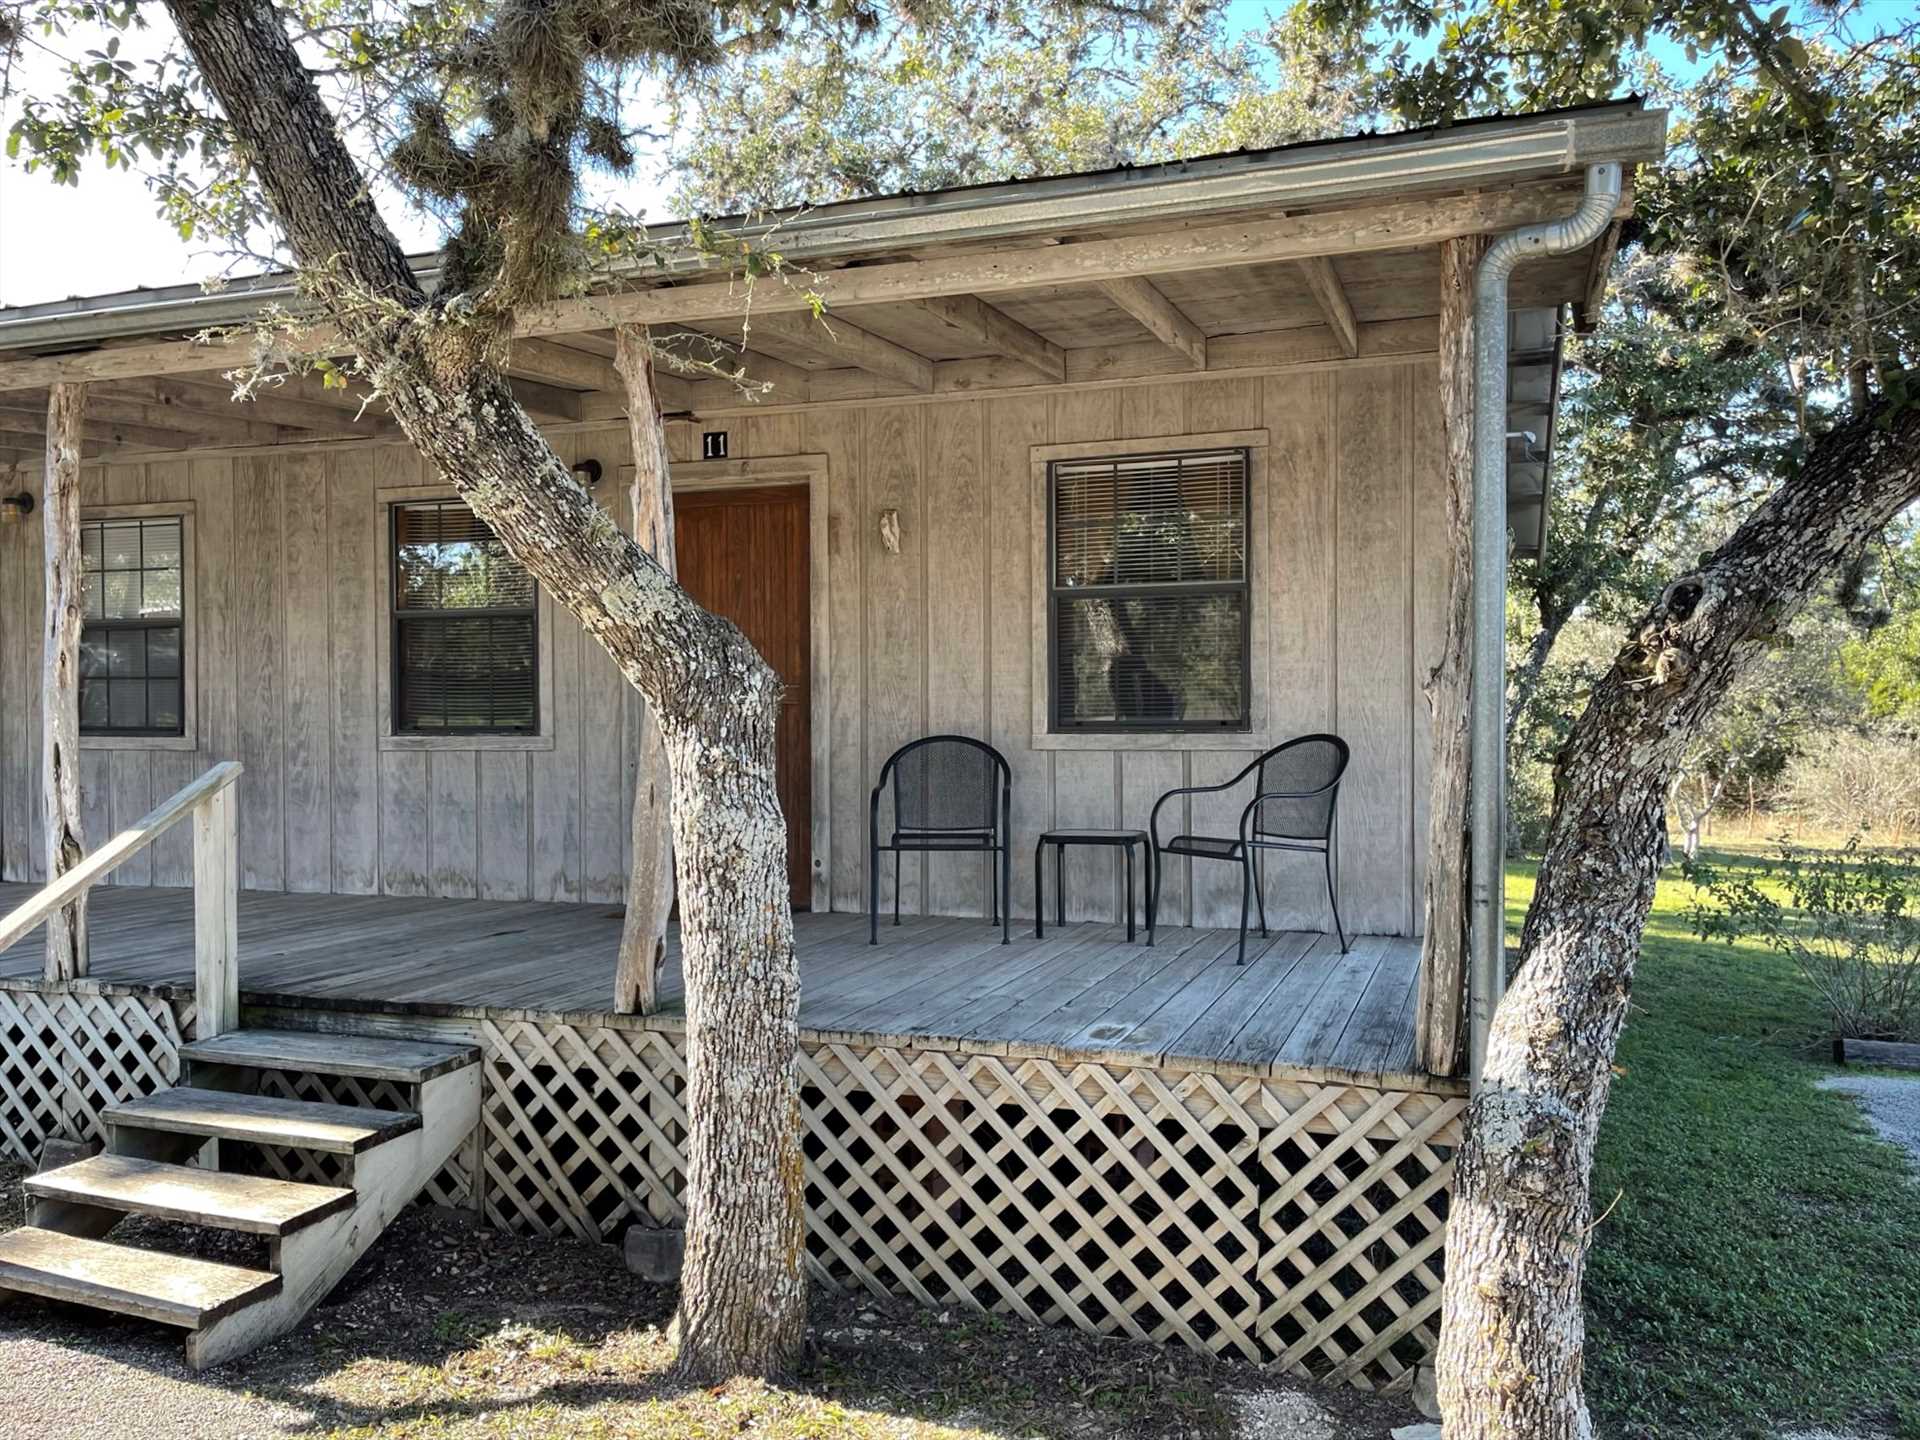                                                 Take in panoramic views of the Hill Country literally from your door! The shaded deck here is a wonderful place to unwind and enjoy.